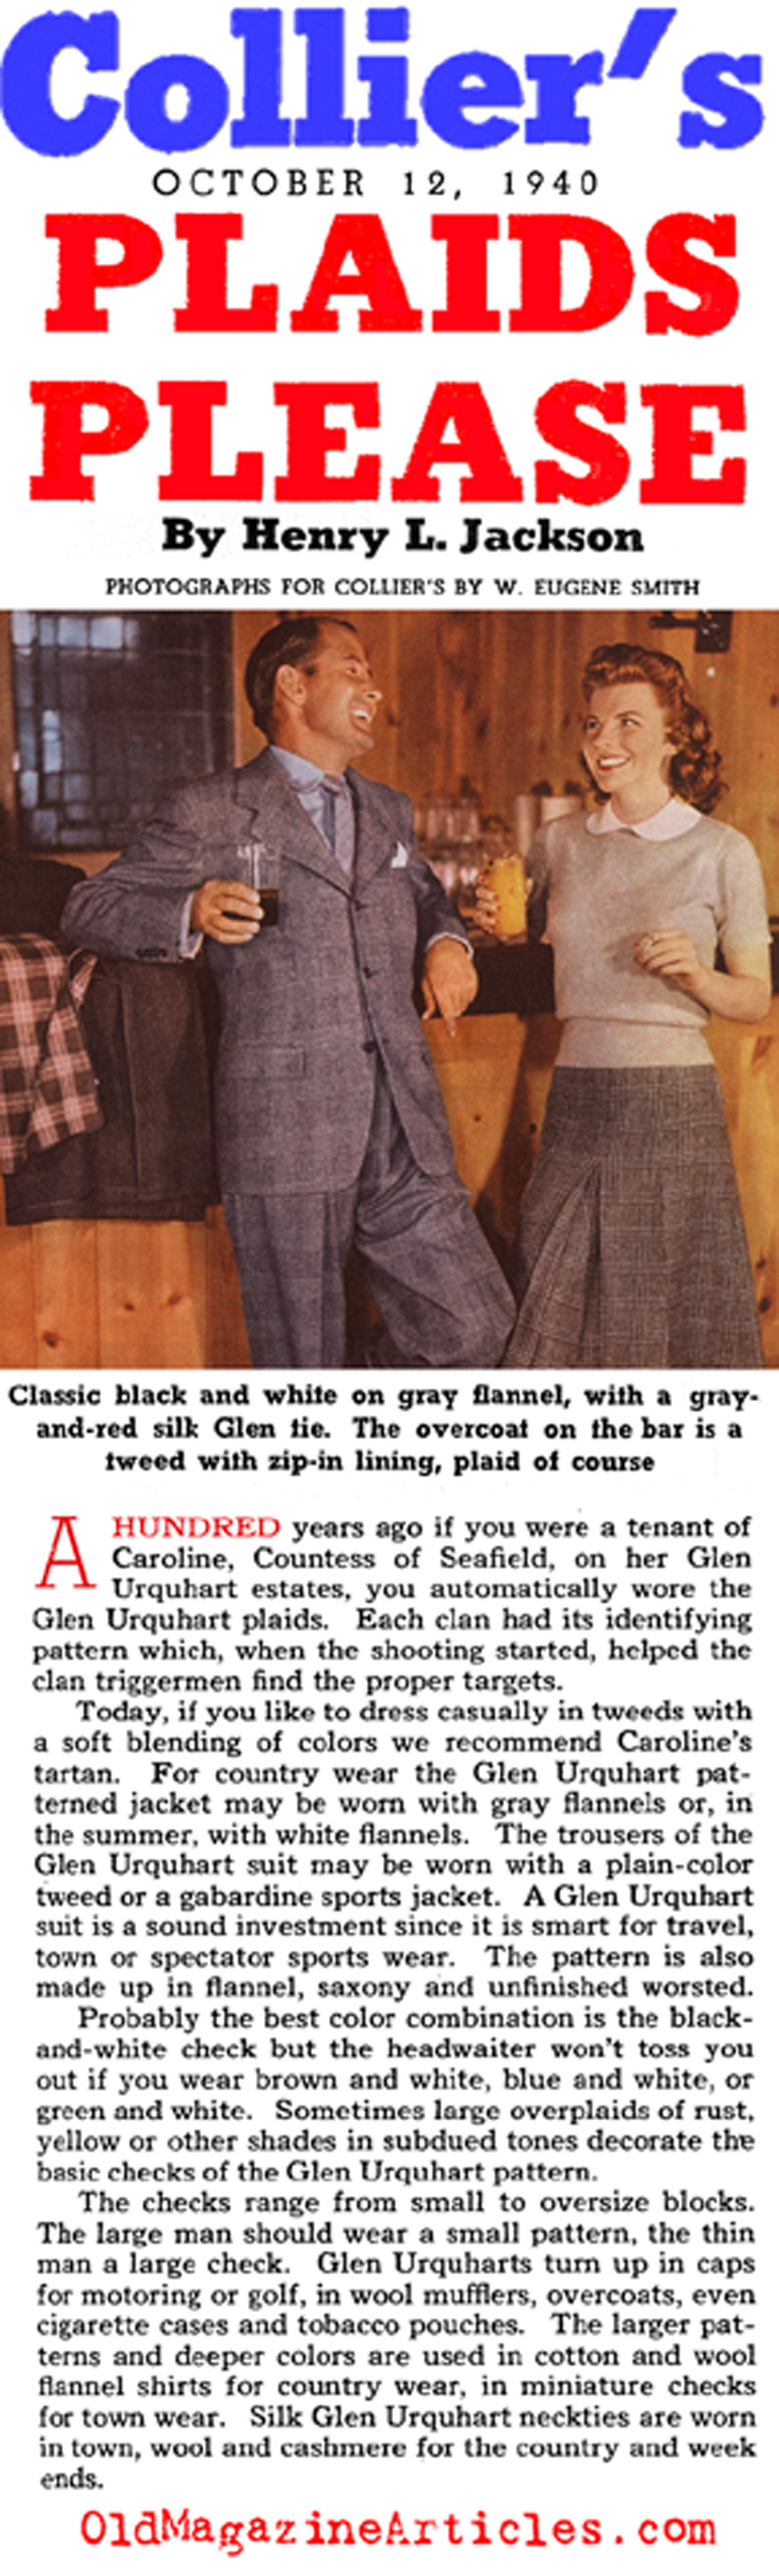 The Mad Plaid of 1940 (Collier's Magazine, 1940)